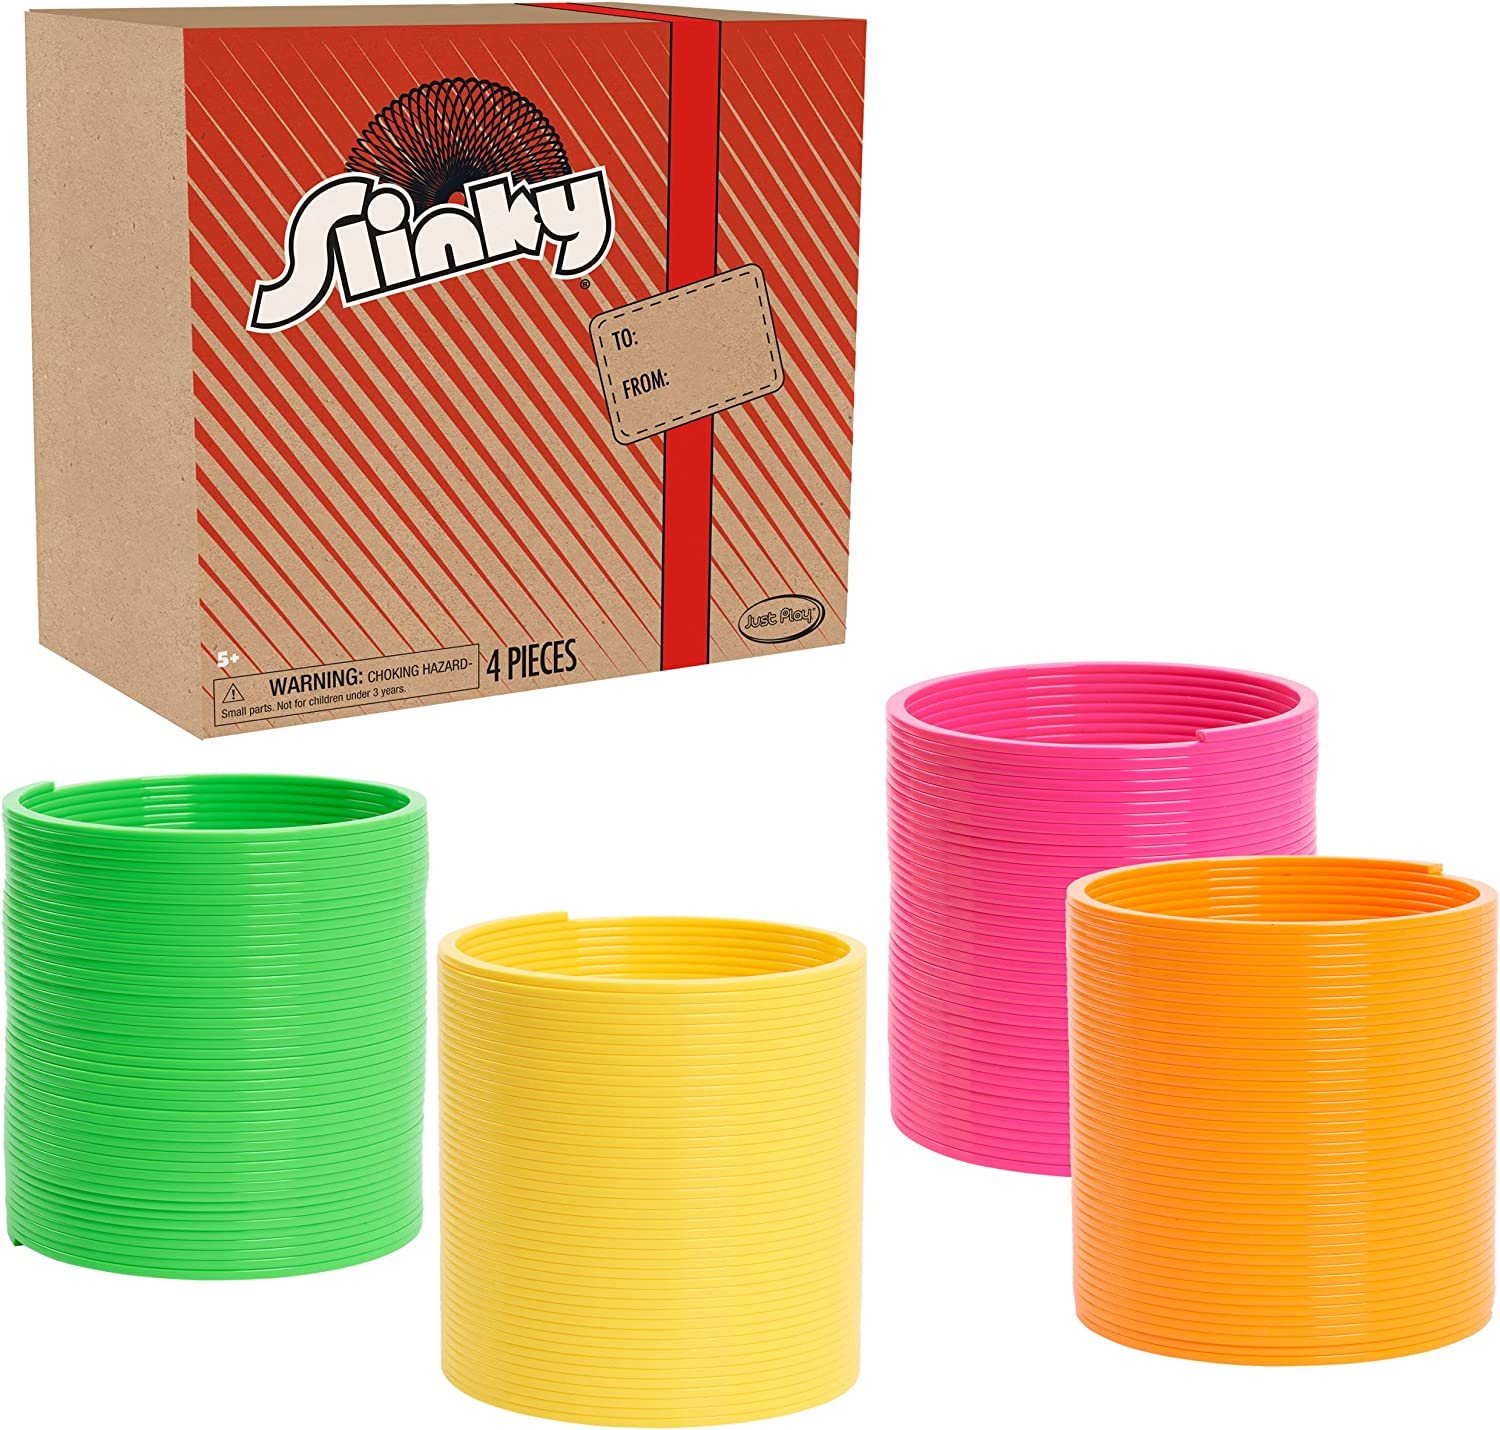 Slinky the Original Walking Spring Toy, Plastic Rainbow Giant Slinky, by Just Play